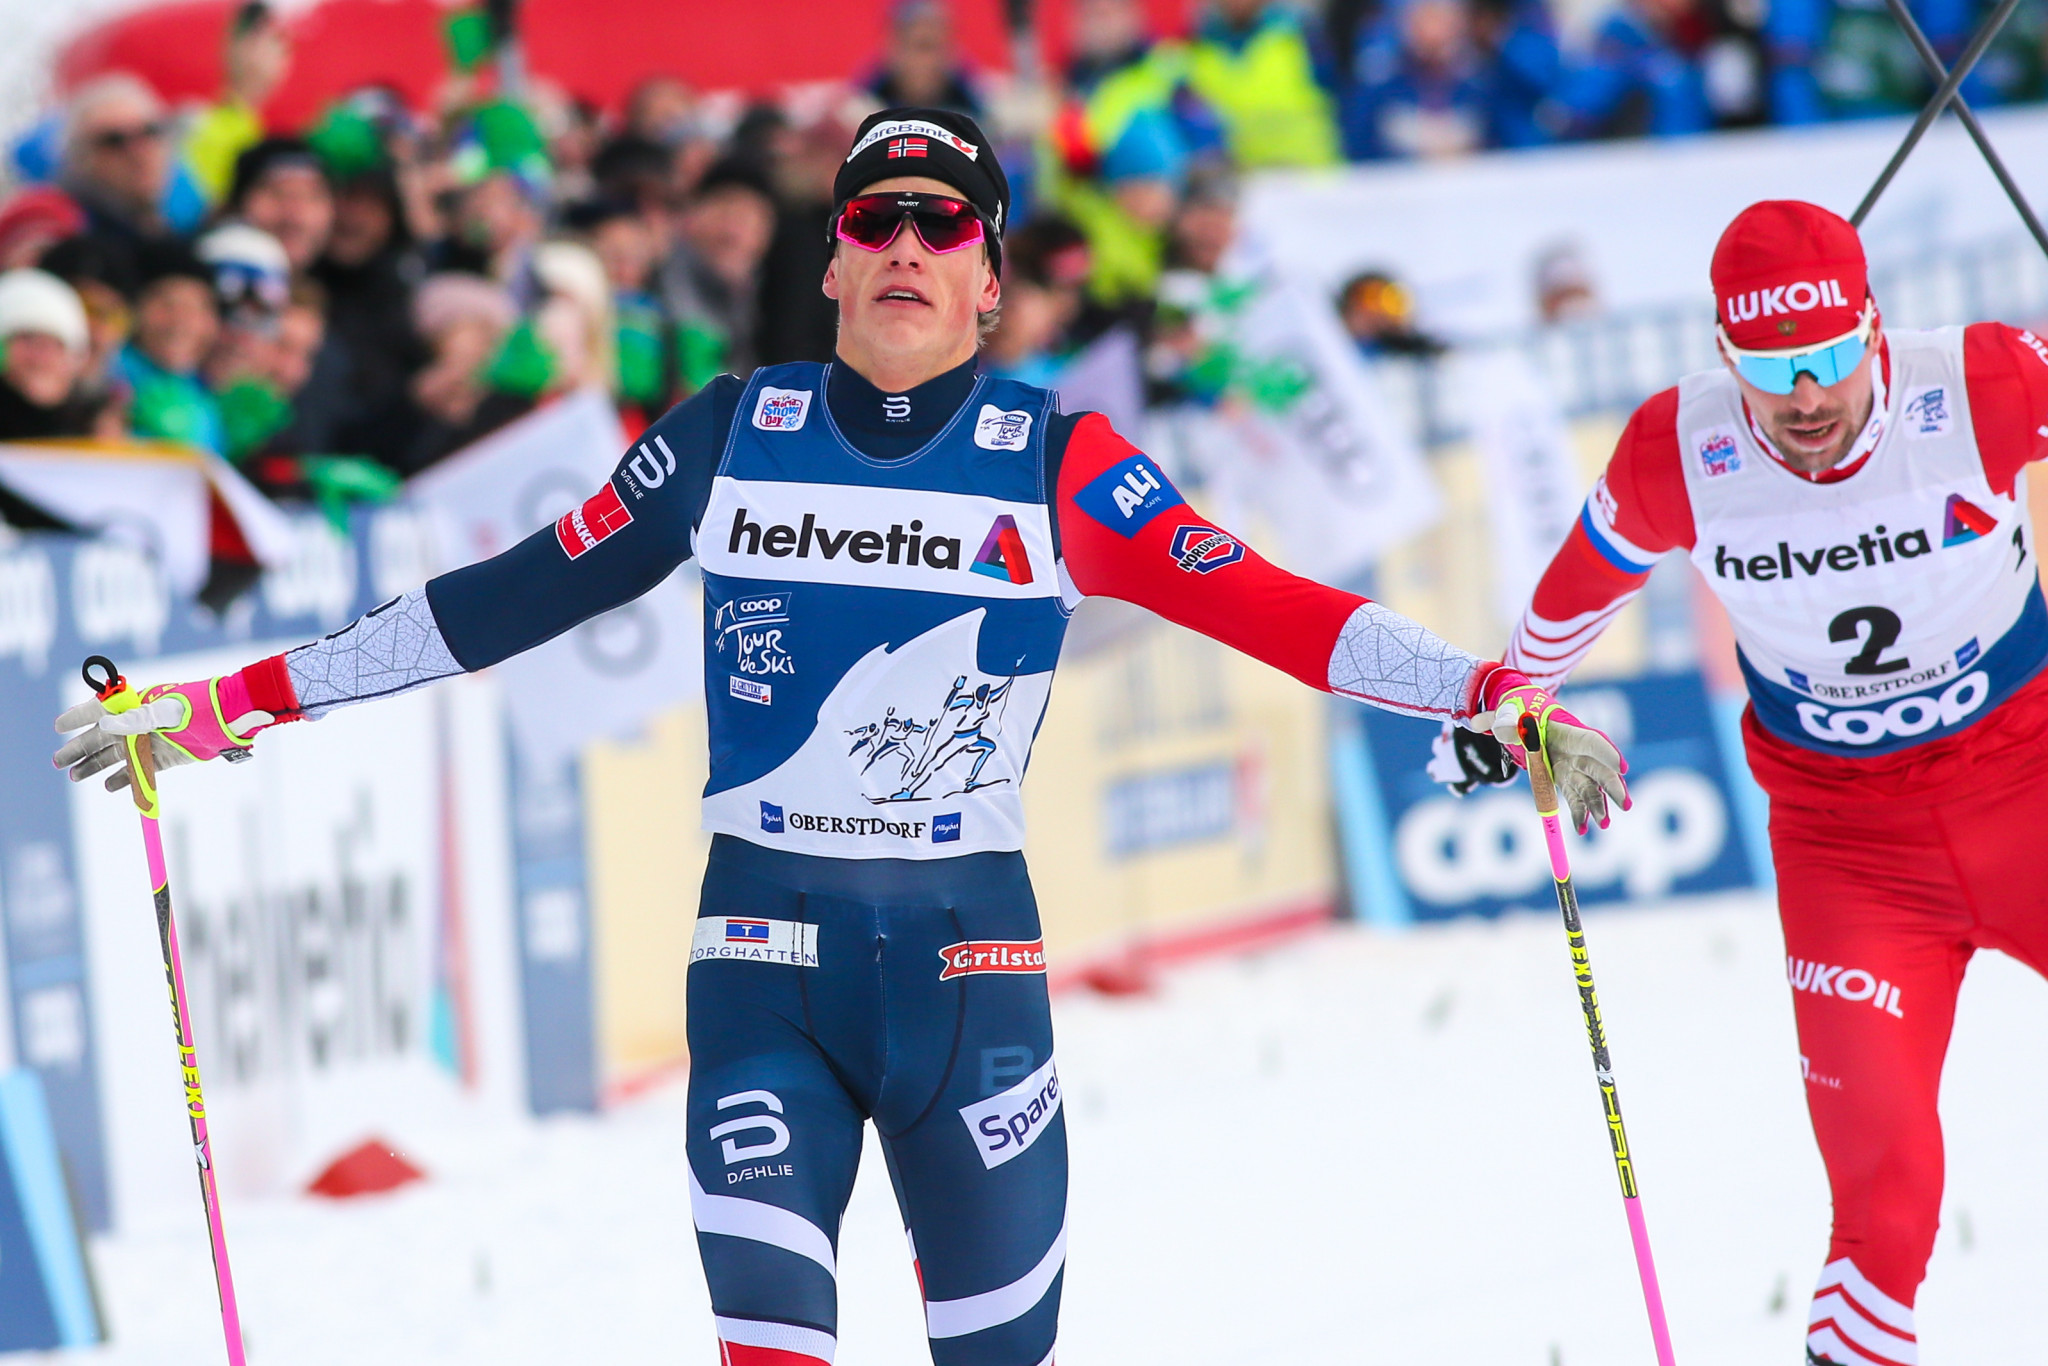 Johannes Hoesflot Klaebo has maintained his lead at the top of the men's International Ski Federation Tour de Ski standings with pursuit victory in Oberstdorf ©Getty Images